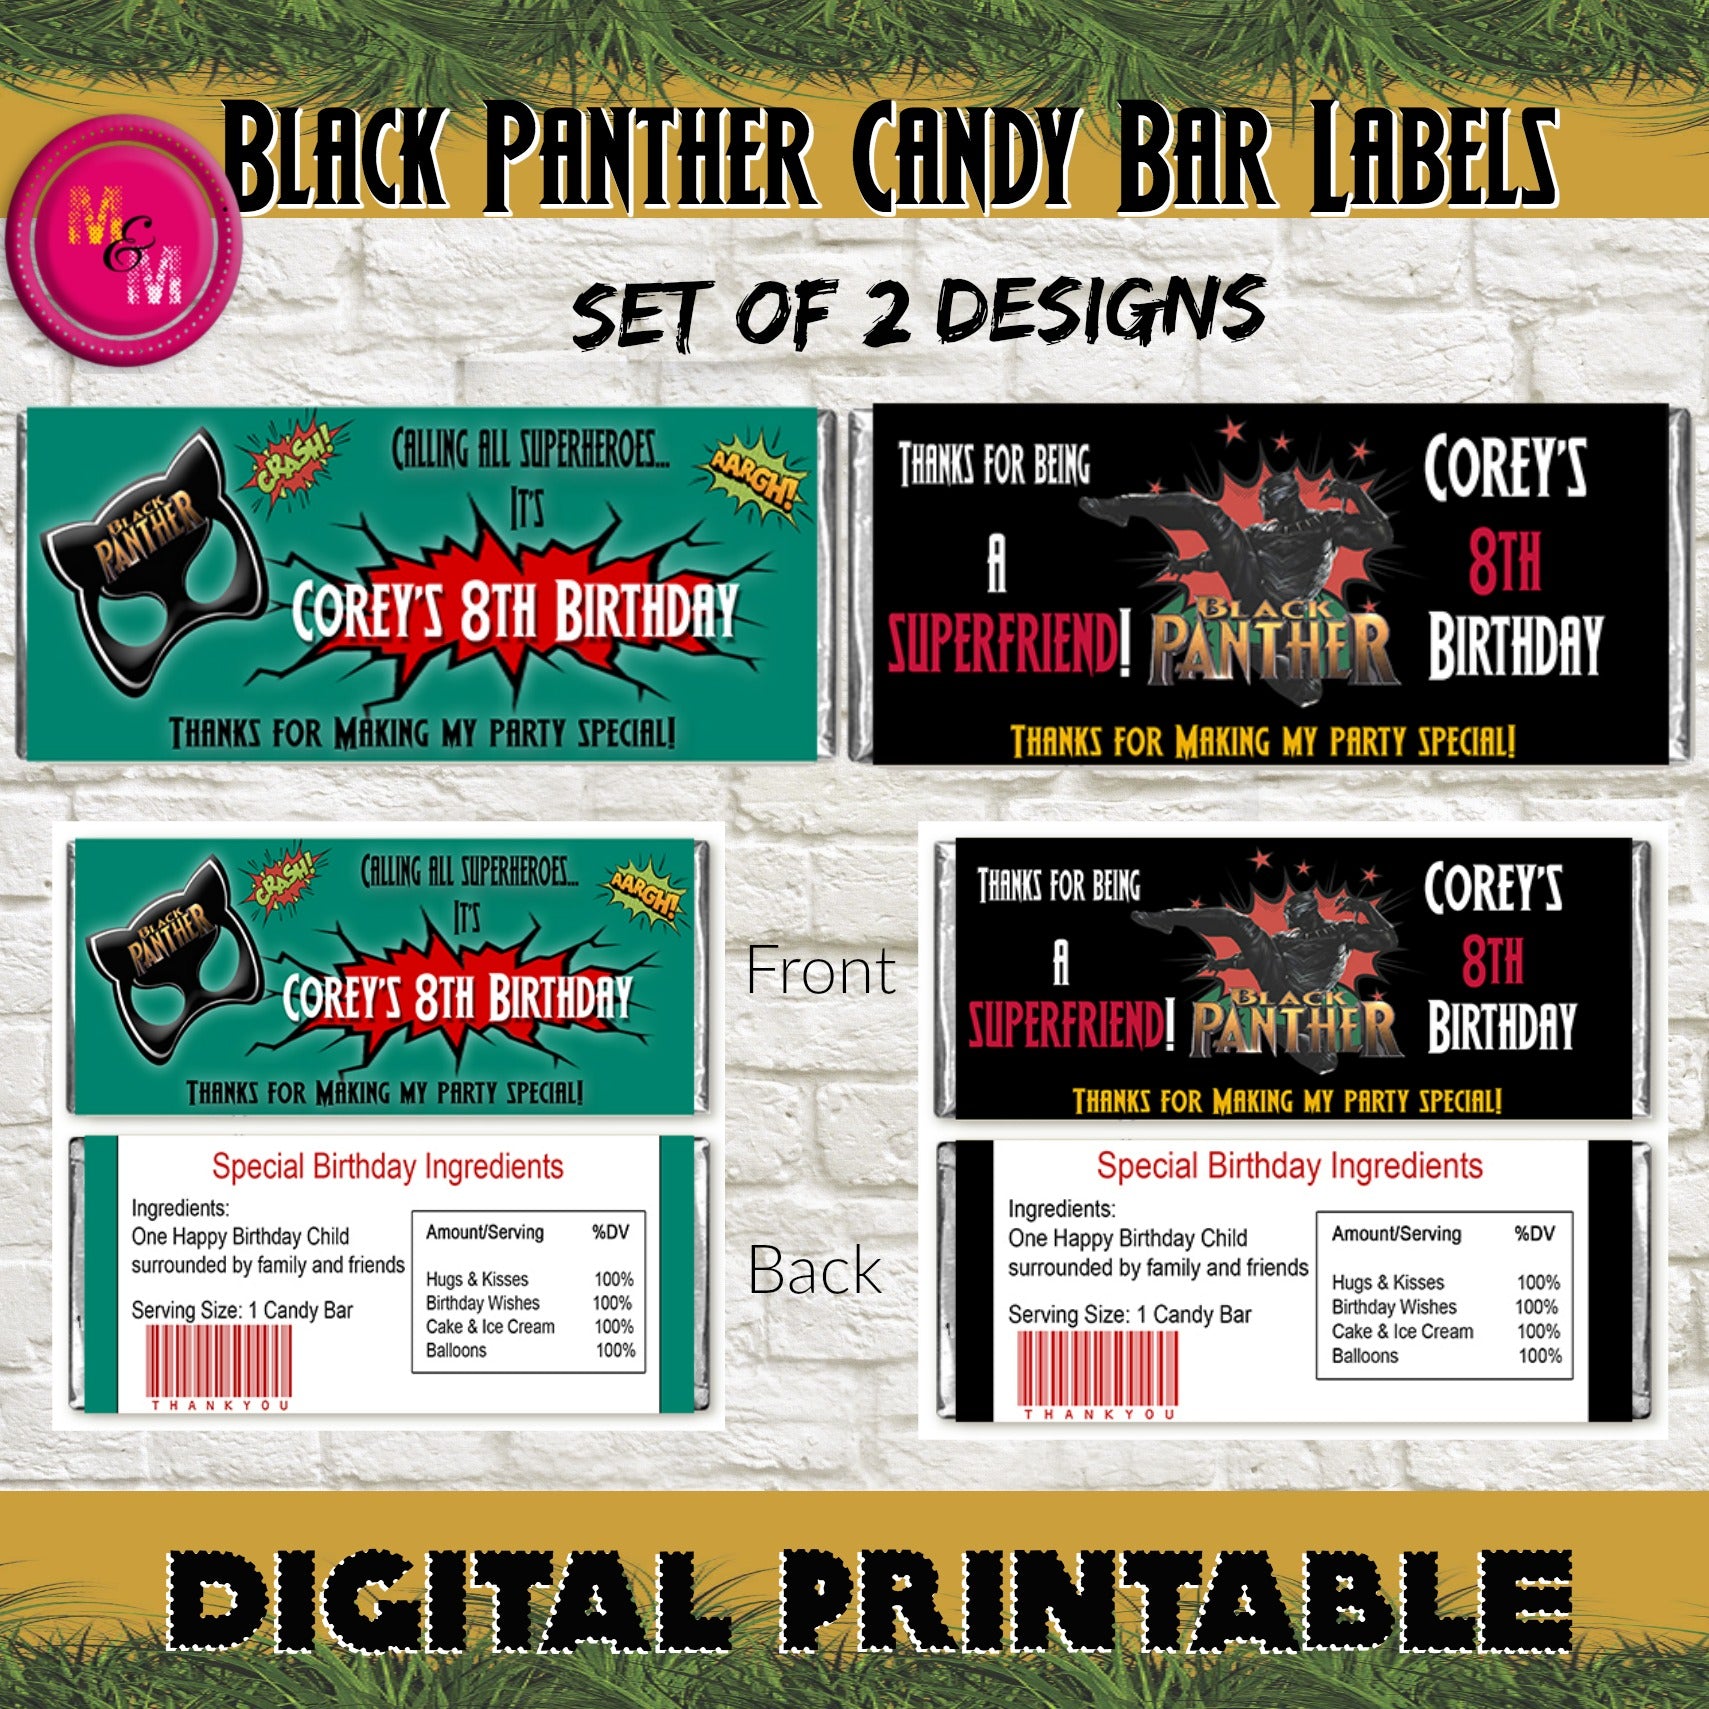 Editable Black Panther Party Candy Bar Wrappers Printable, Black Panther Candy Bars, Superhero Candy Bar Wrappers, Black Panther Party Favor - mugandmousedesigns